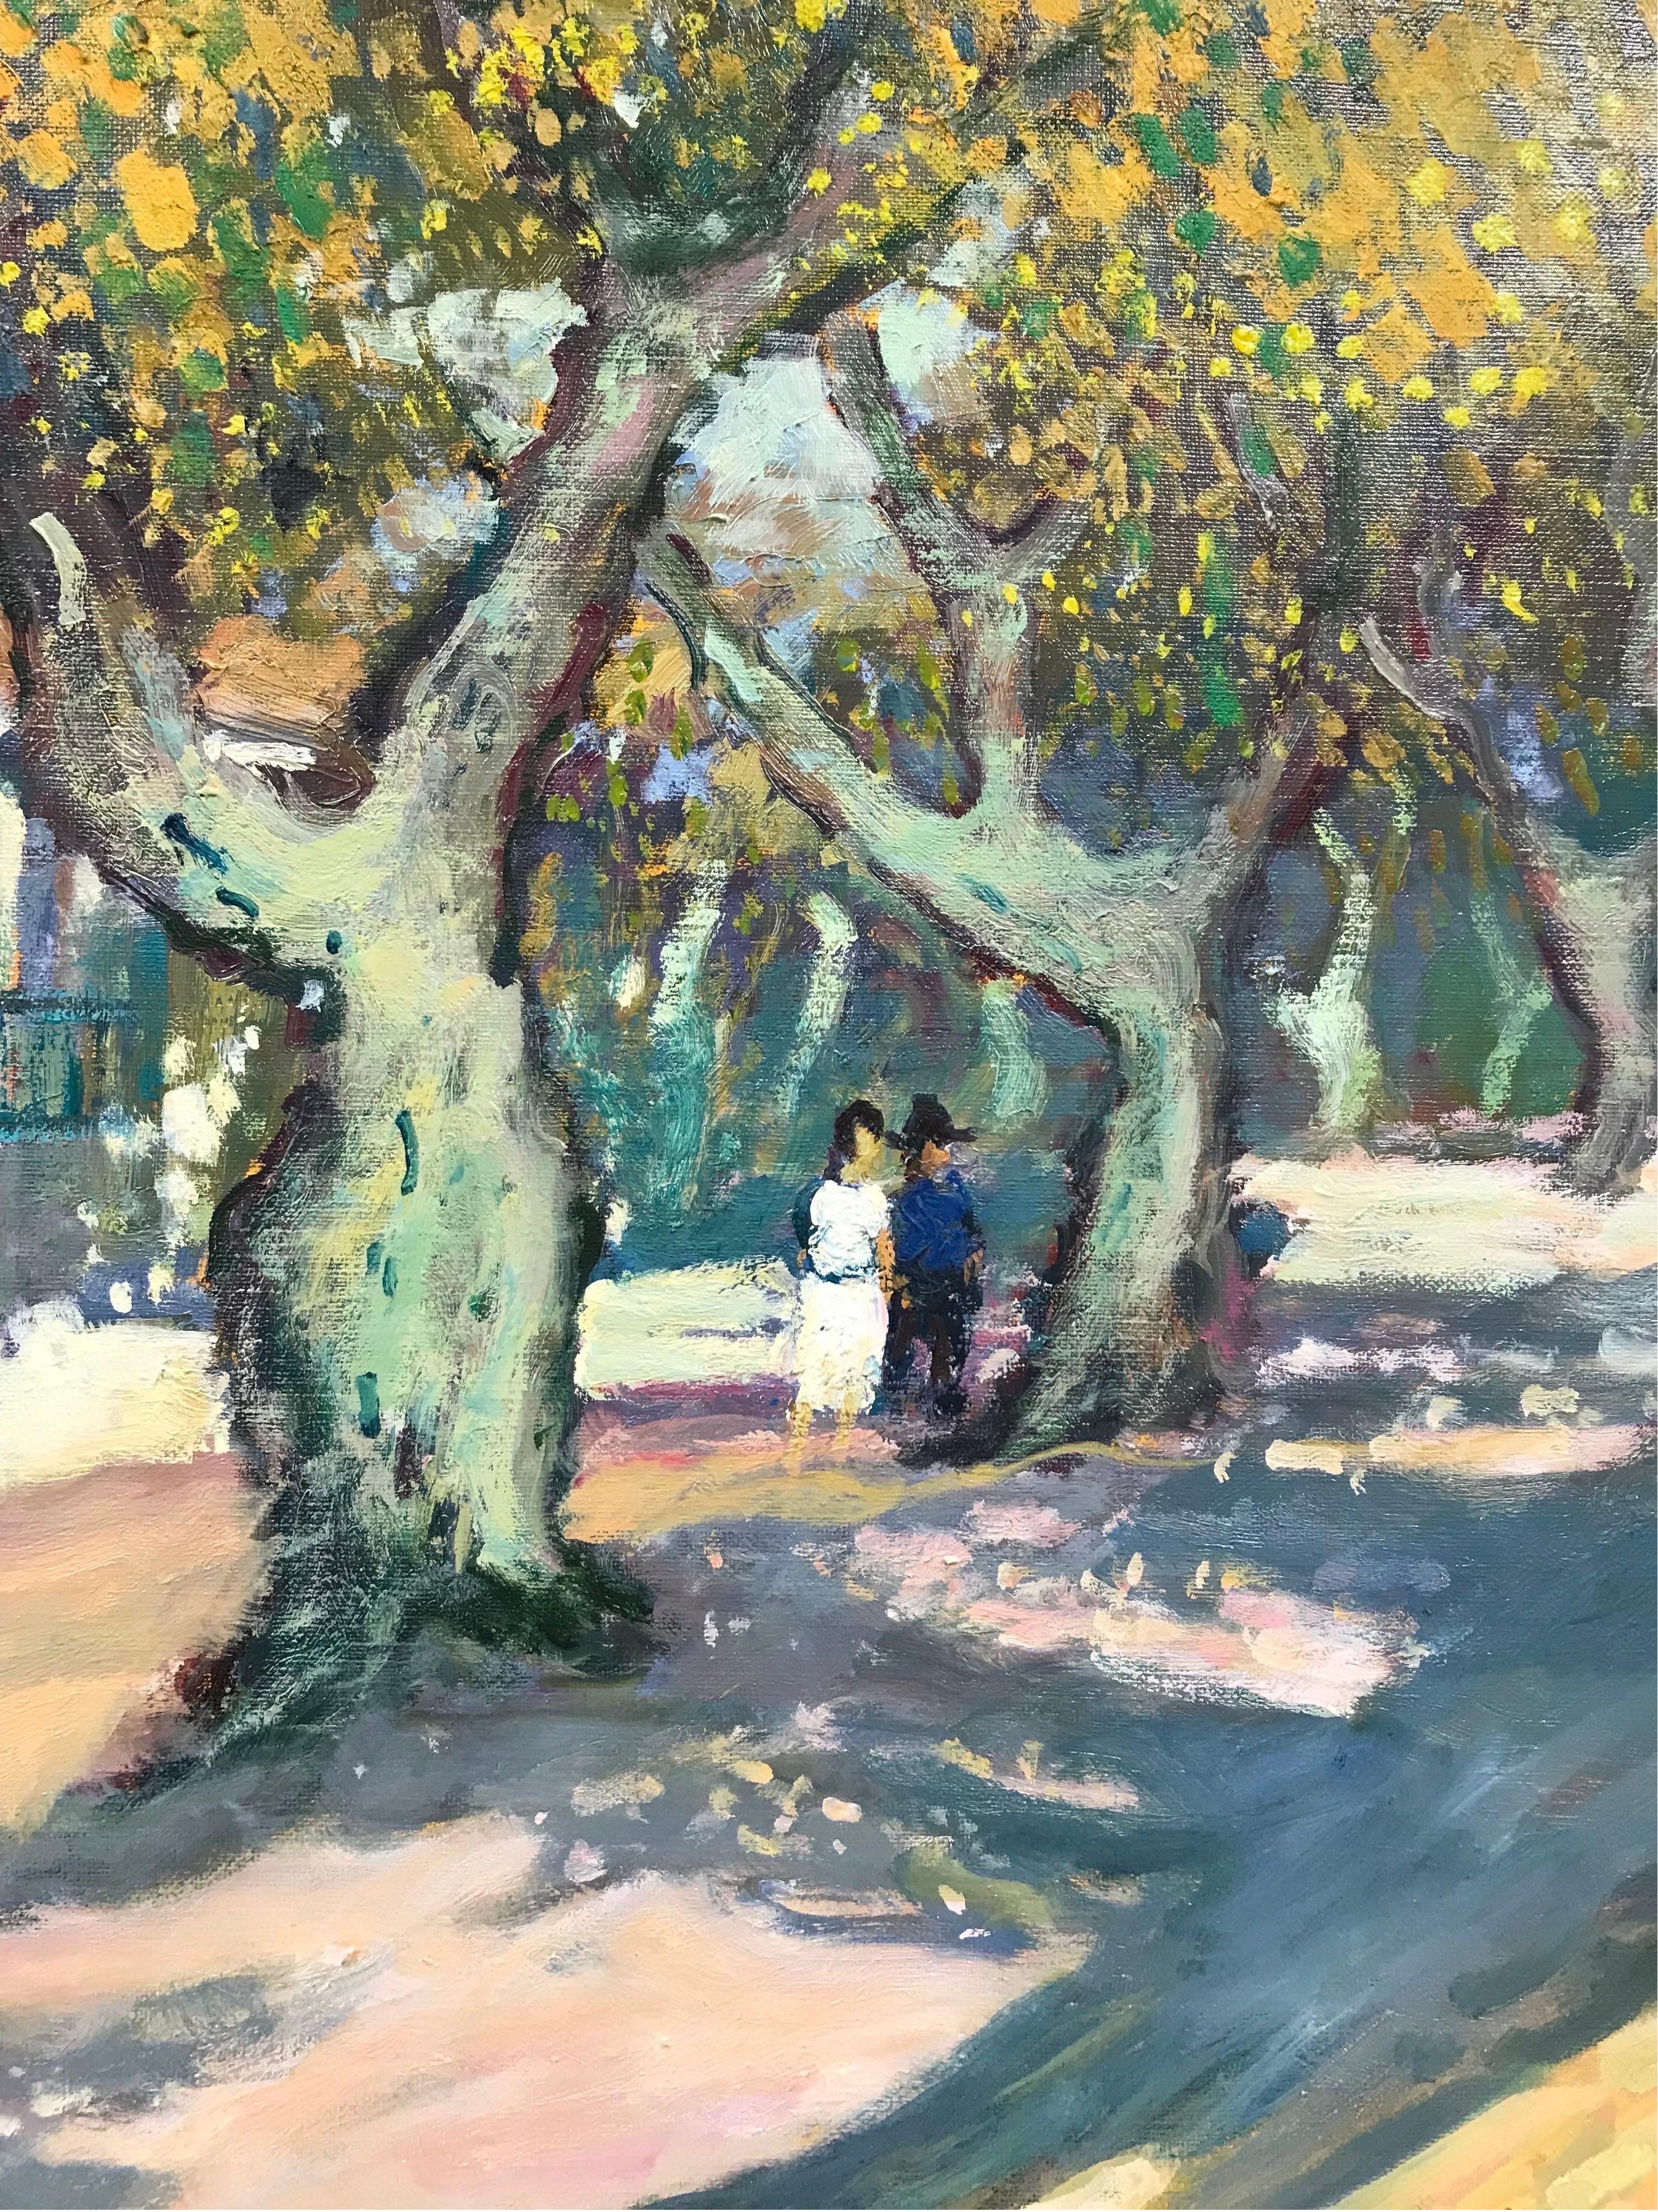 Artist/ School: signed Guy Benard, French late 20h century

Title: 'Arles, Route de Alyscals', a fine post-impressionist view of these figures in a square in Arles under large plain trees. Heavily inspired by the works by Vincent van Gogh. 

Medium: